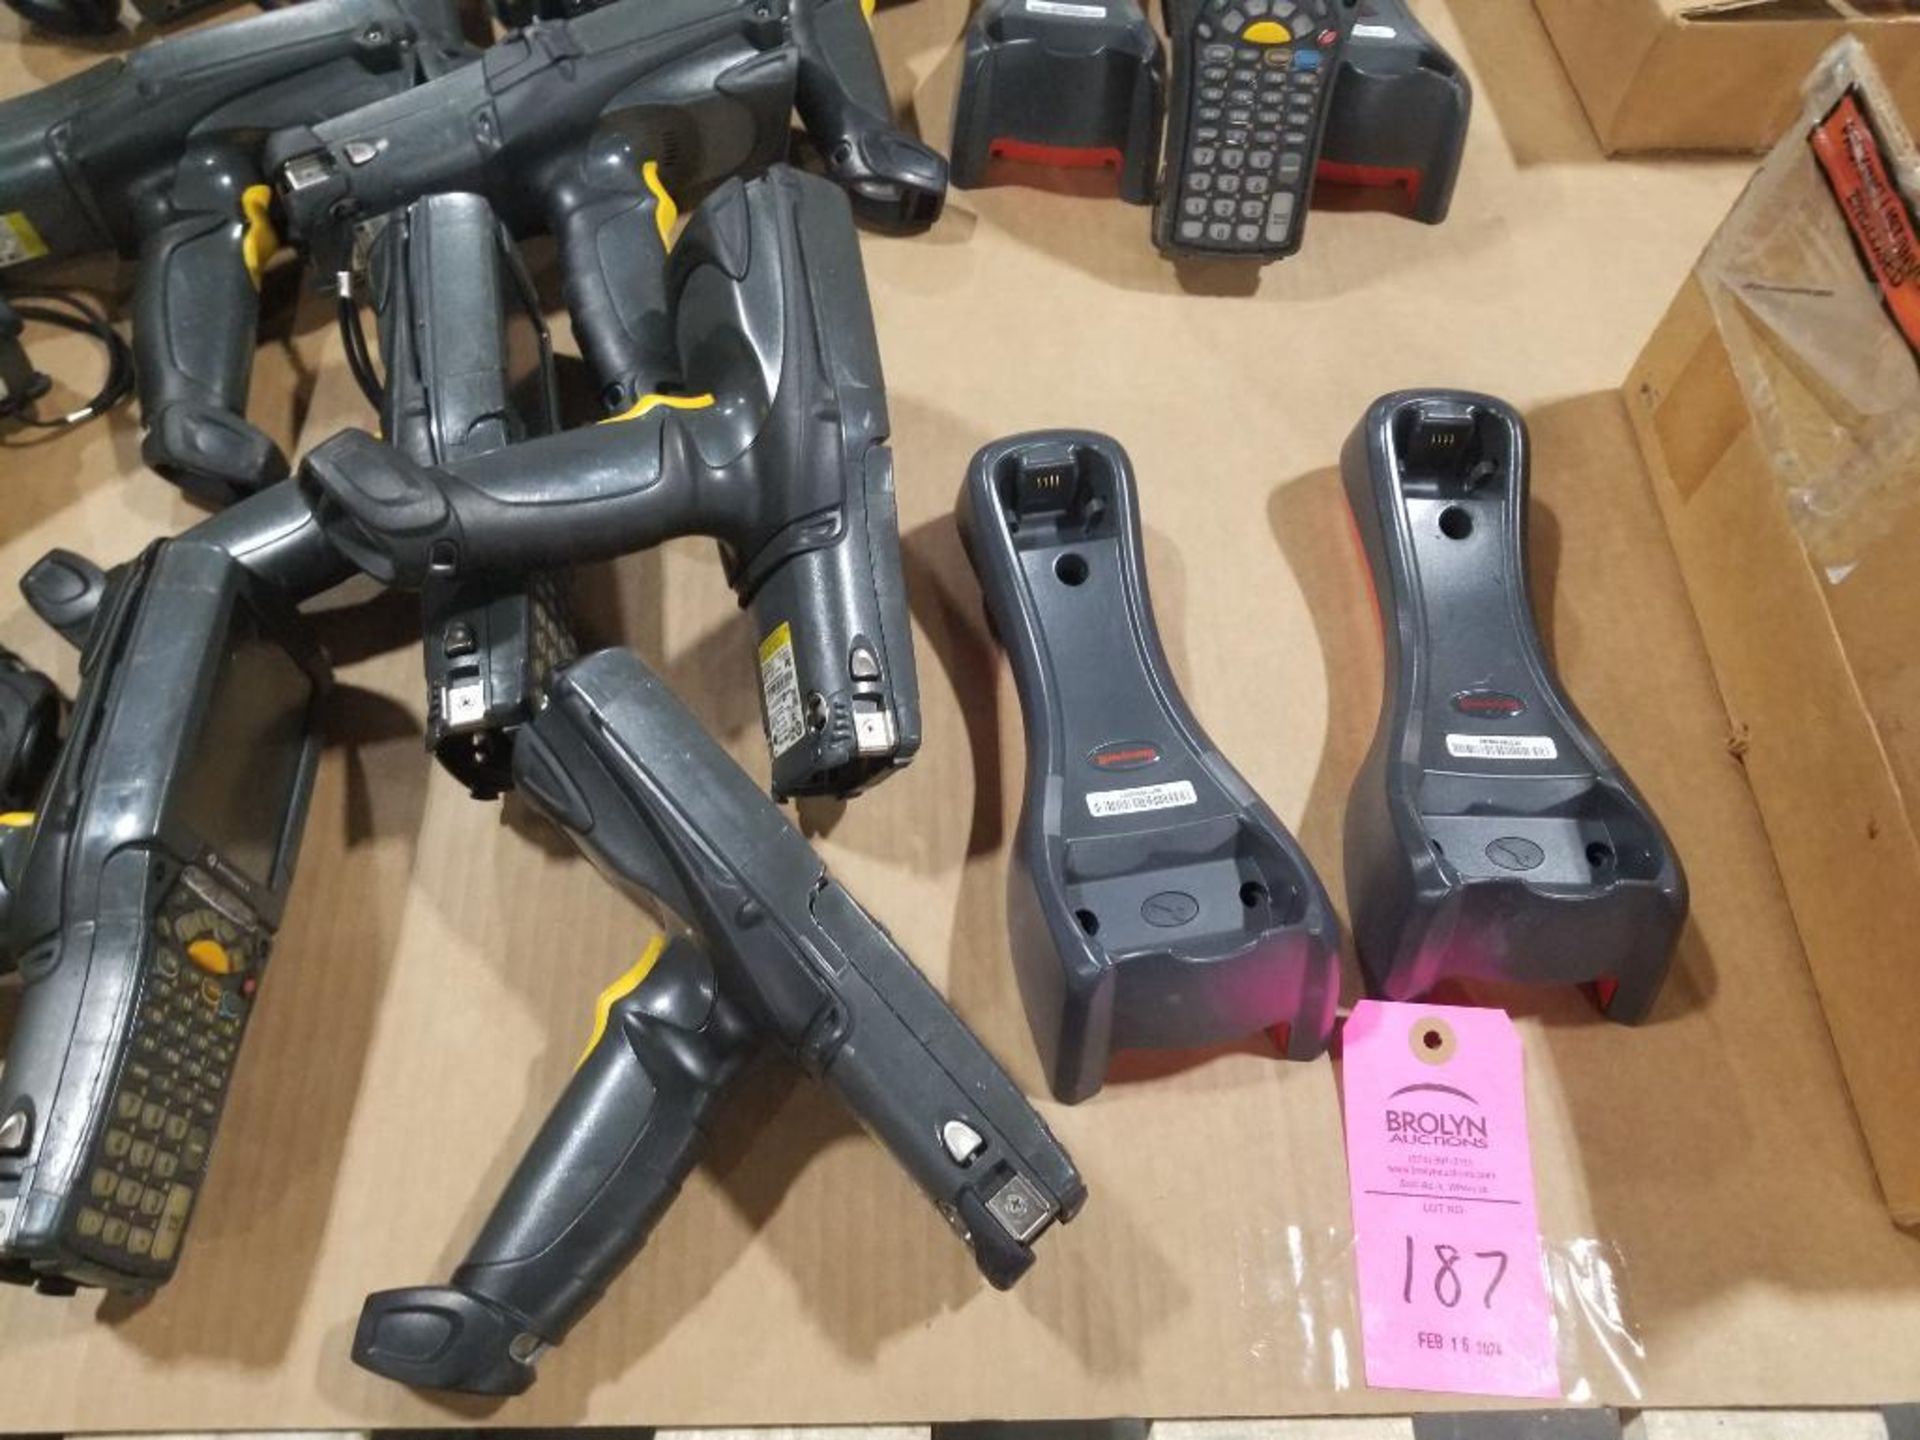 Large assortment of hand held bar code scanners. - Image 7 of 13